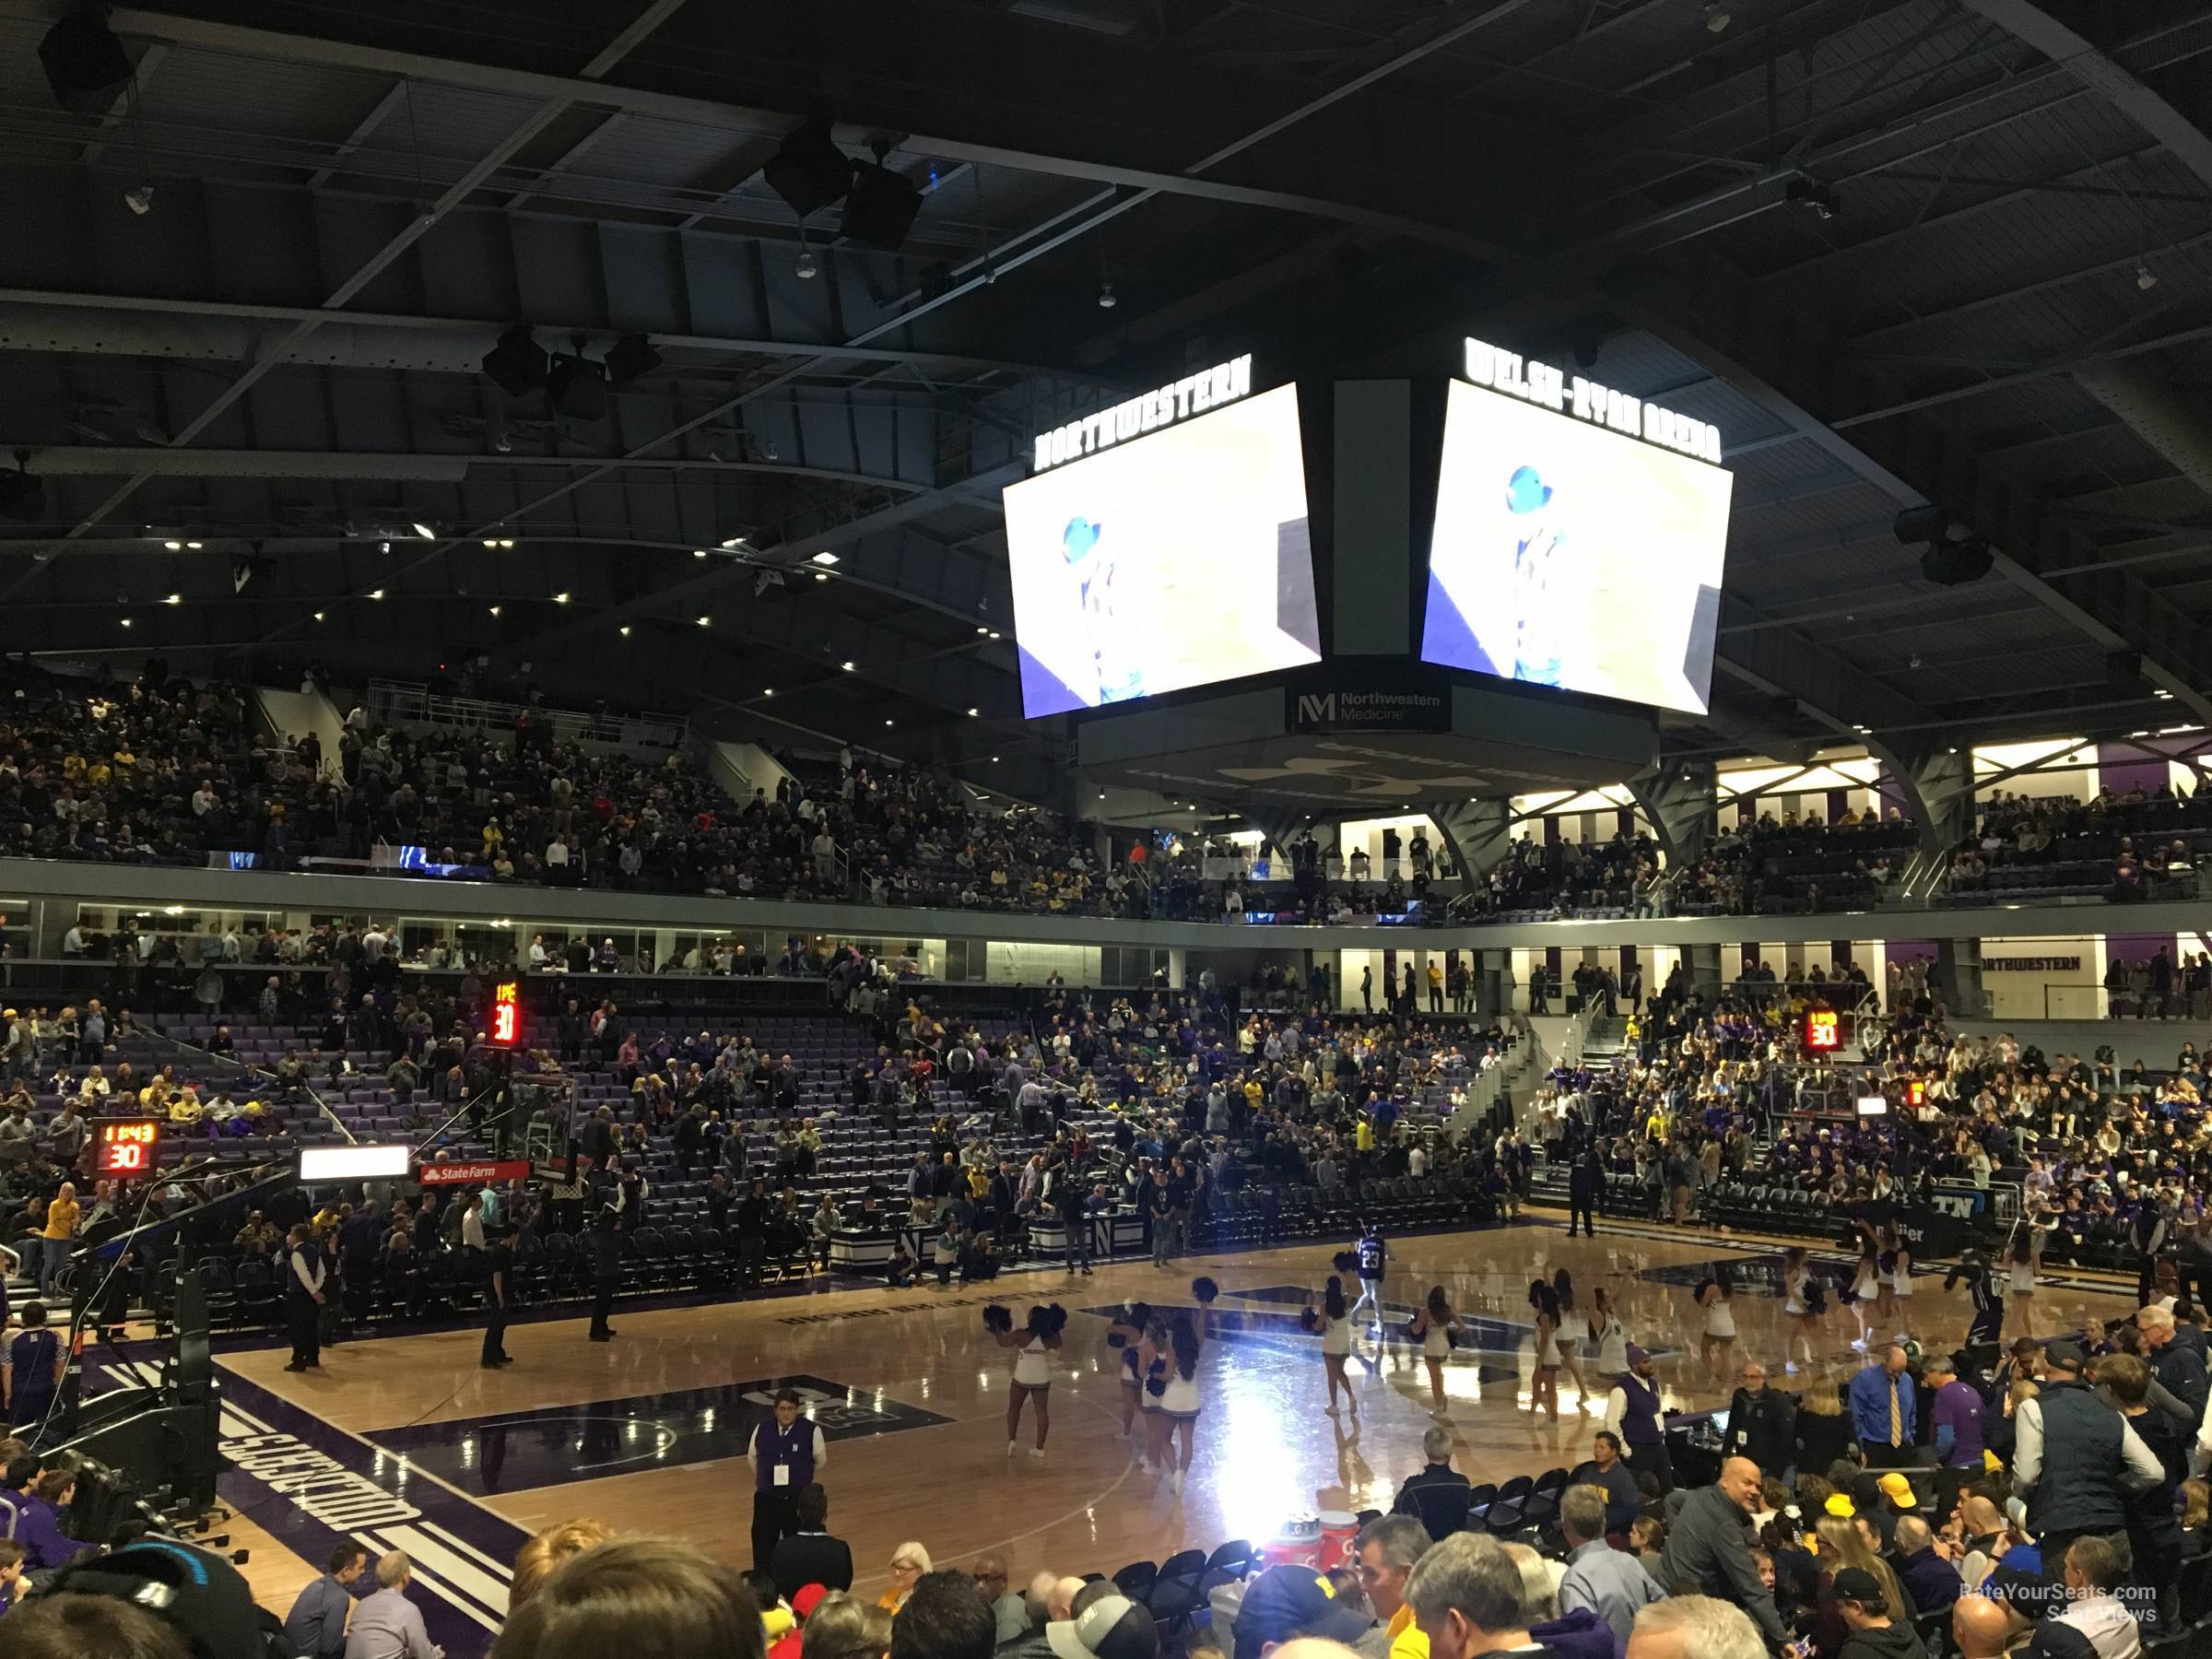 section 110, row 12 seat view  - welsh-ryan arena